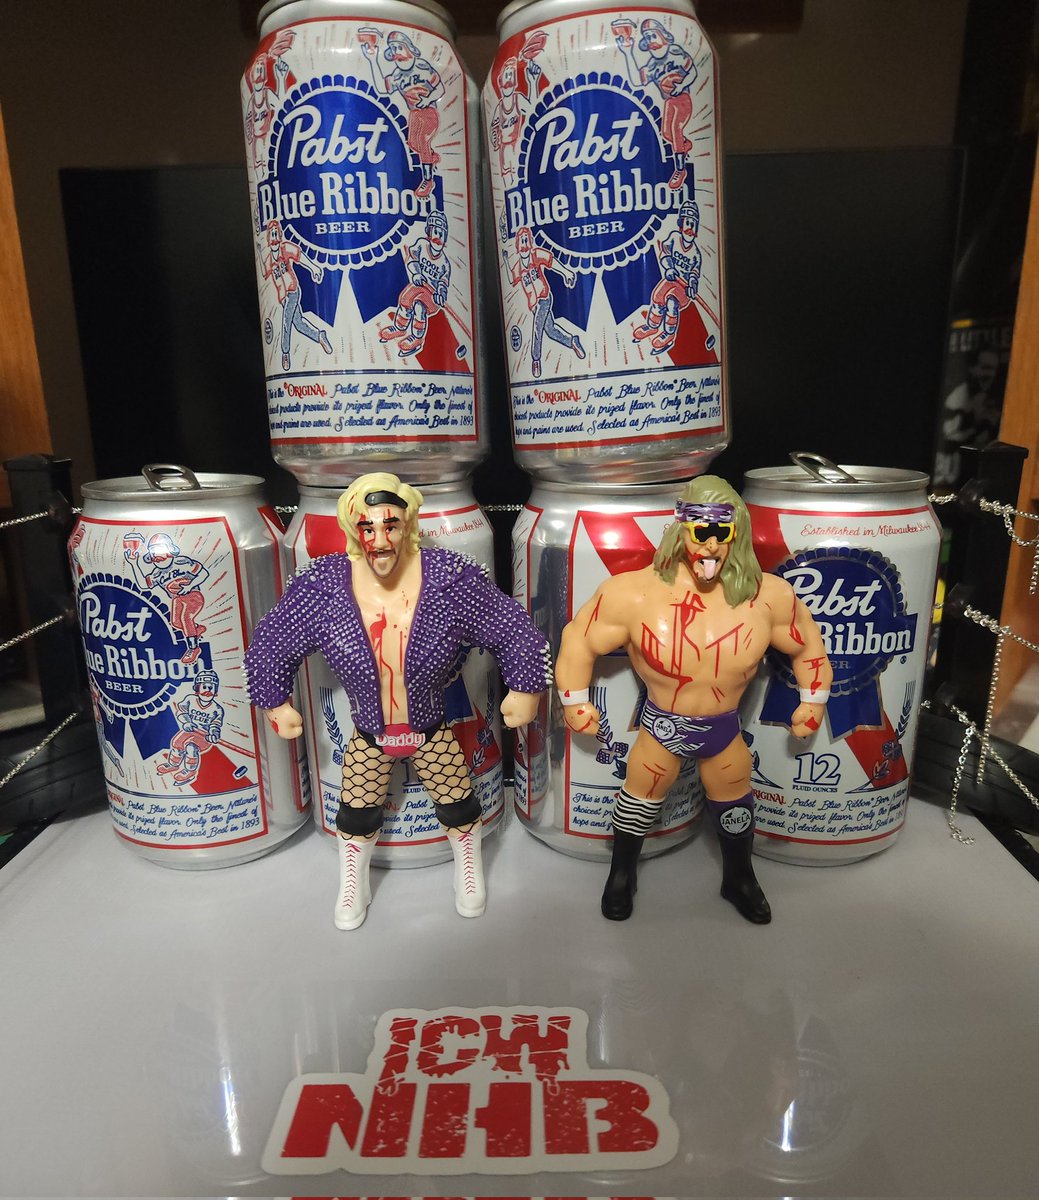 #MajorBendies and #MajorPBR collided today! Got in my bloody variant Effy and Joey Janela bendies AND crushed a sixer of #MajorPBR 

Cheers Major Marks